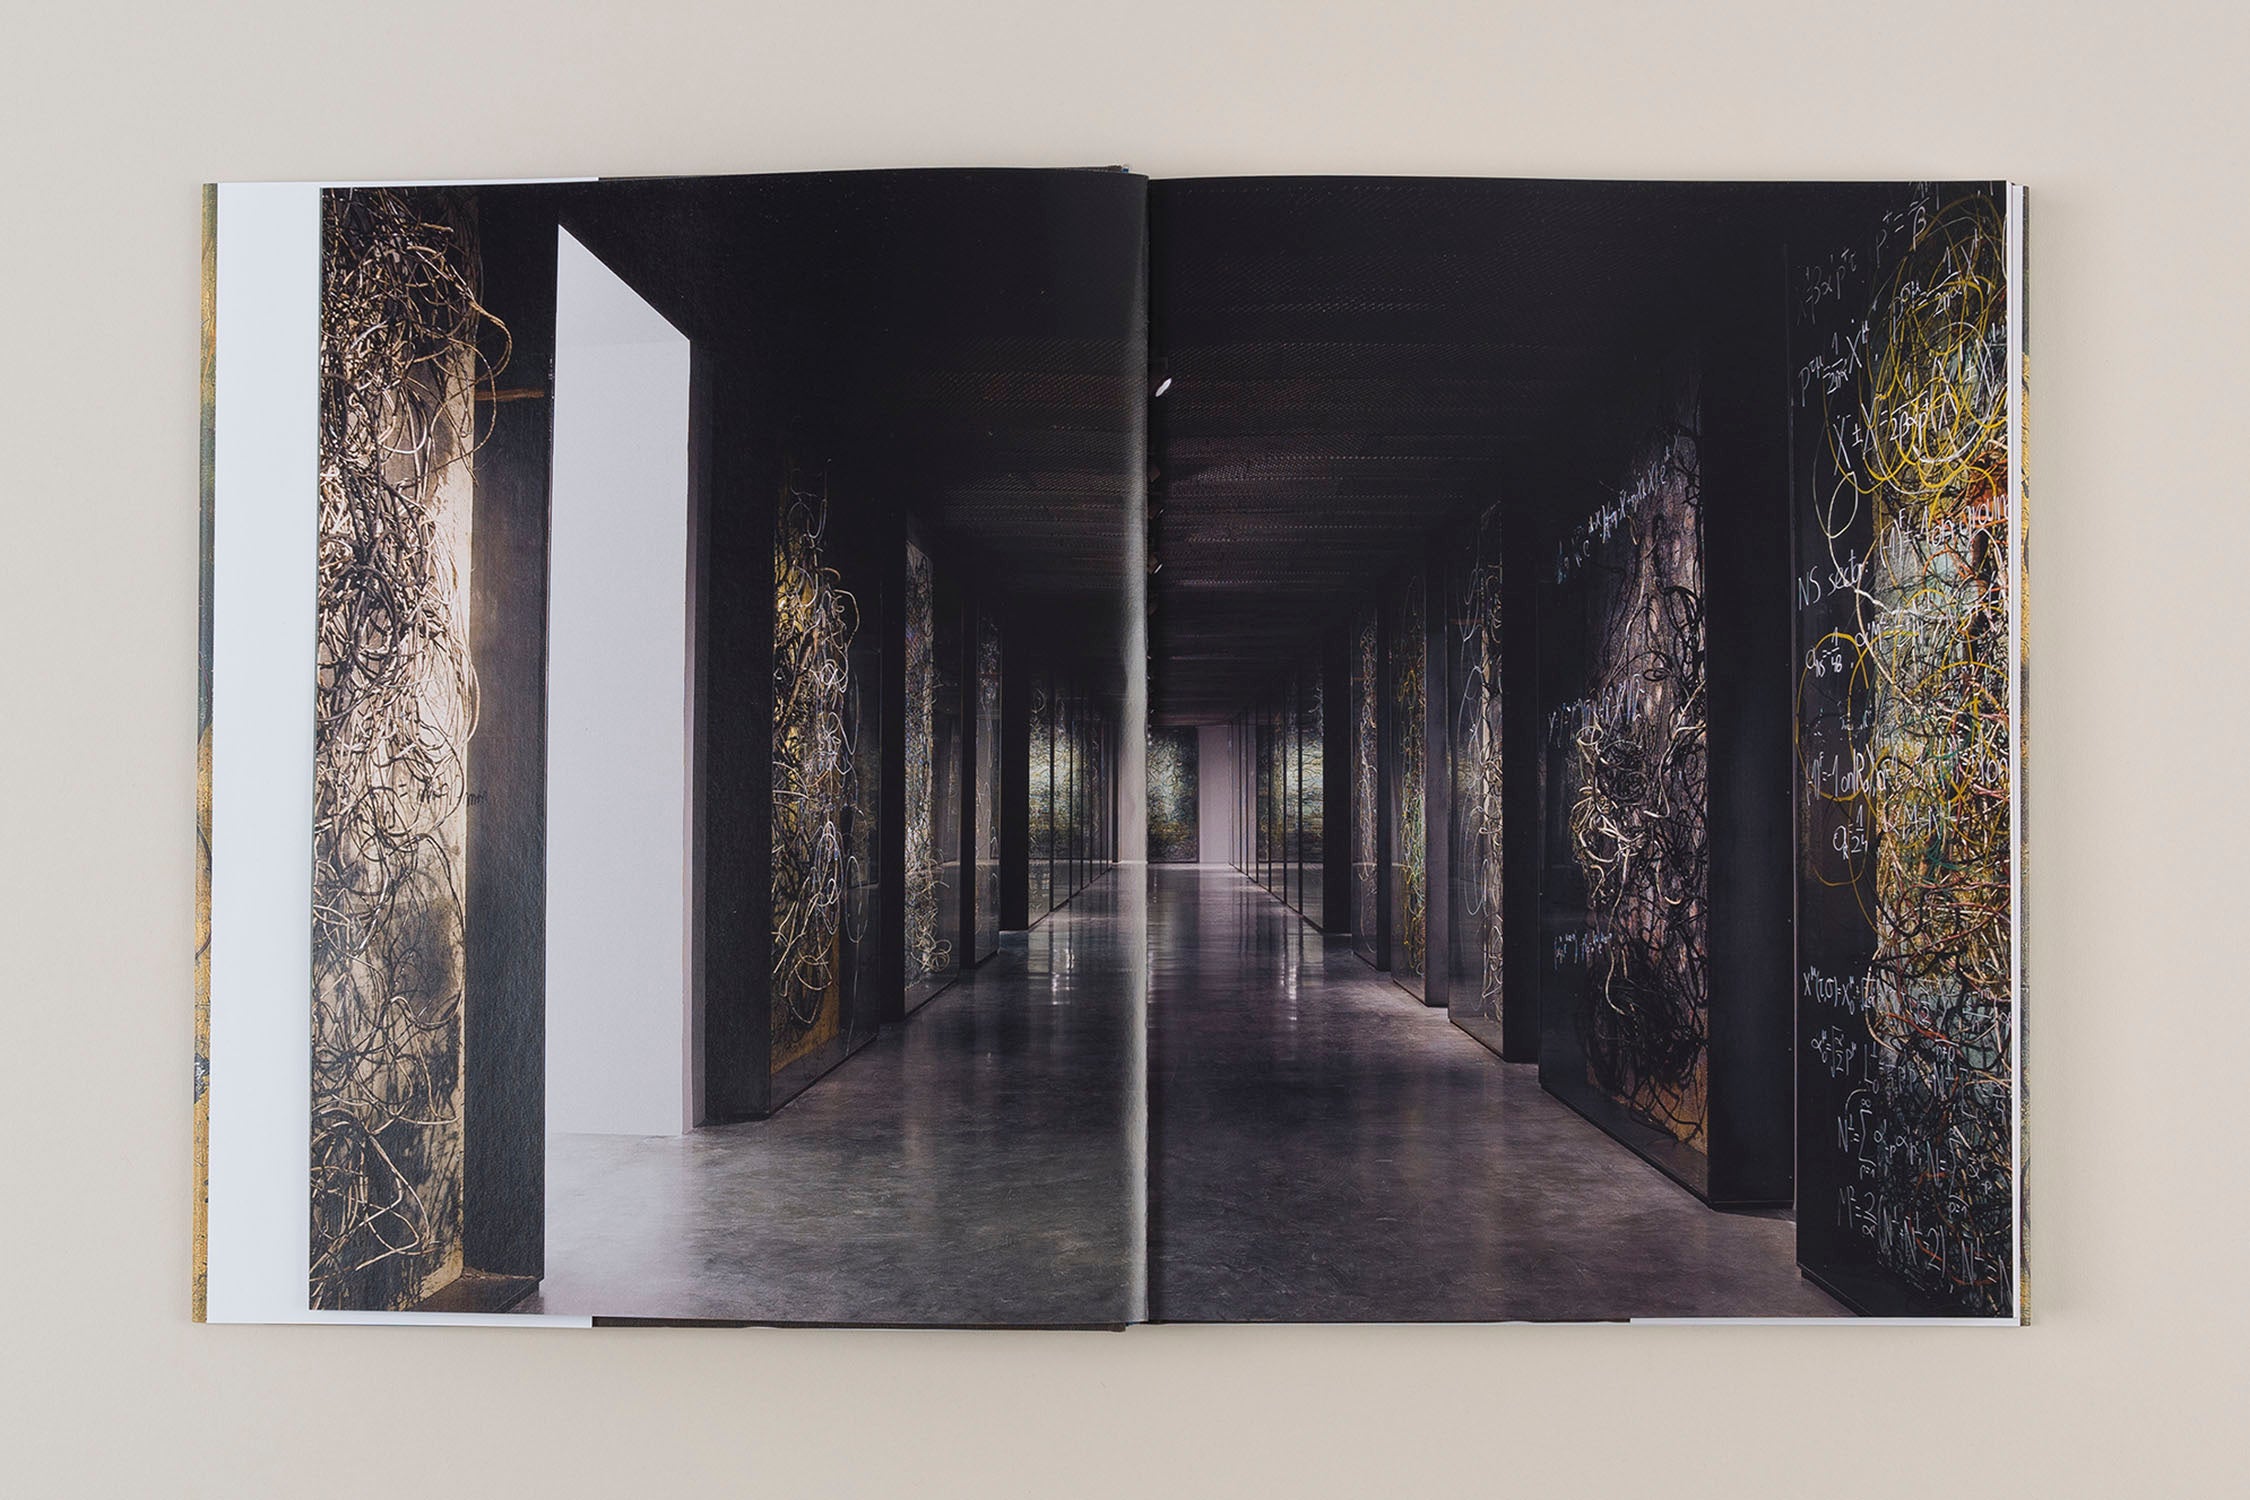 Anselm Kiefer ‘Superstrings, Runes, The Norns, Gordian Knot’ (2020)